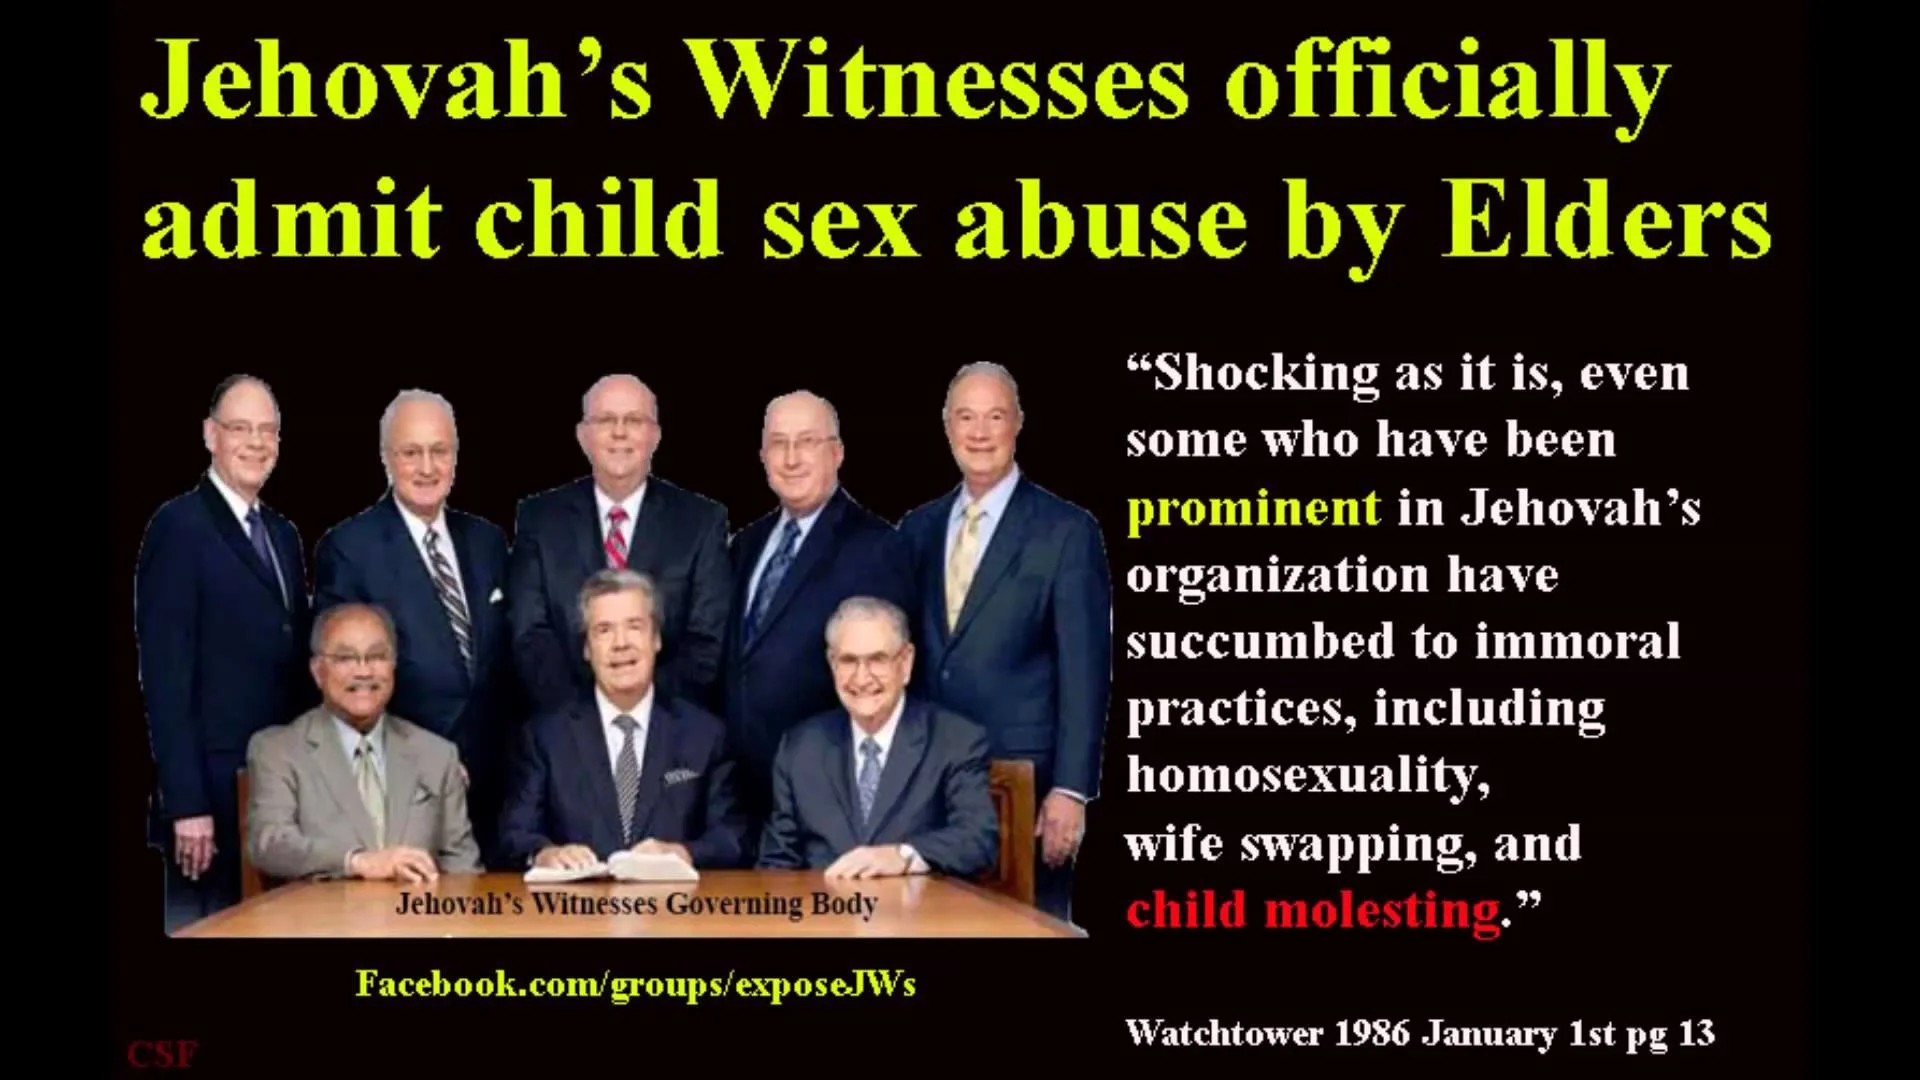 Jehovahs Witnesses Officially Admit Child Sex Abuse by Elders